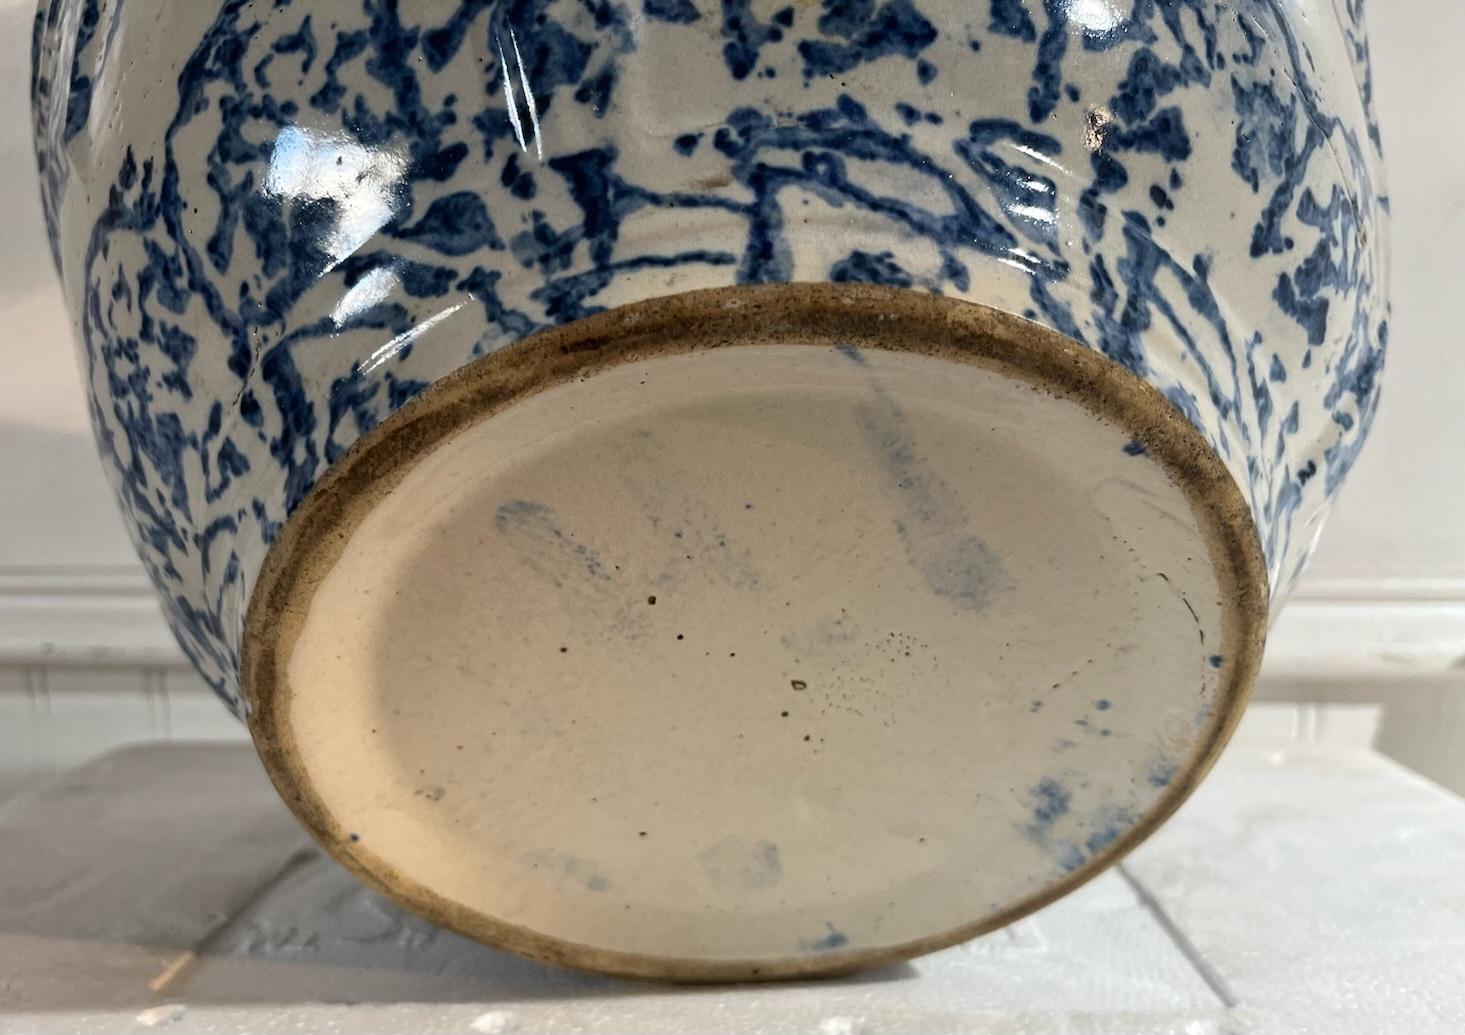 19thc Sponge ware pitcher with hand painted blue scalloped design. The bowl was made to have a scalloped texture feel underneath the hand painted blue sponge look. Great color to the body , wonderful wear consistent of age and use. Great patina.